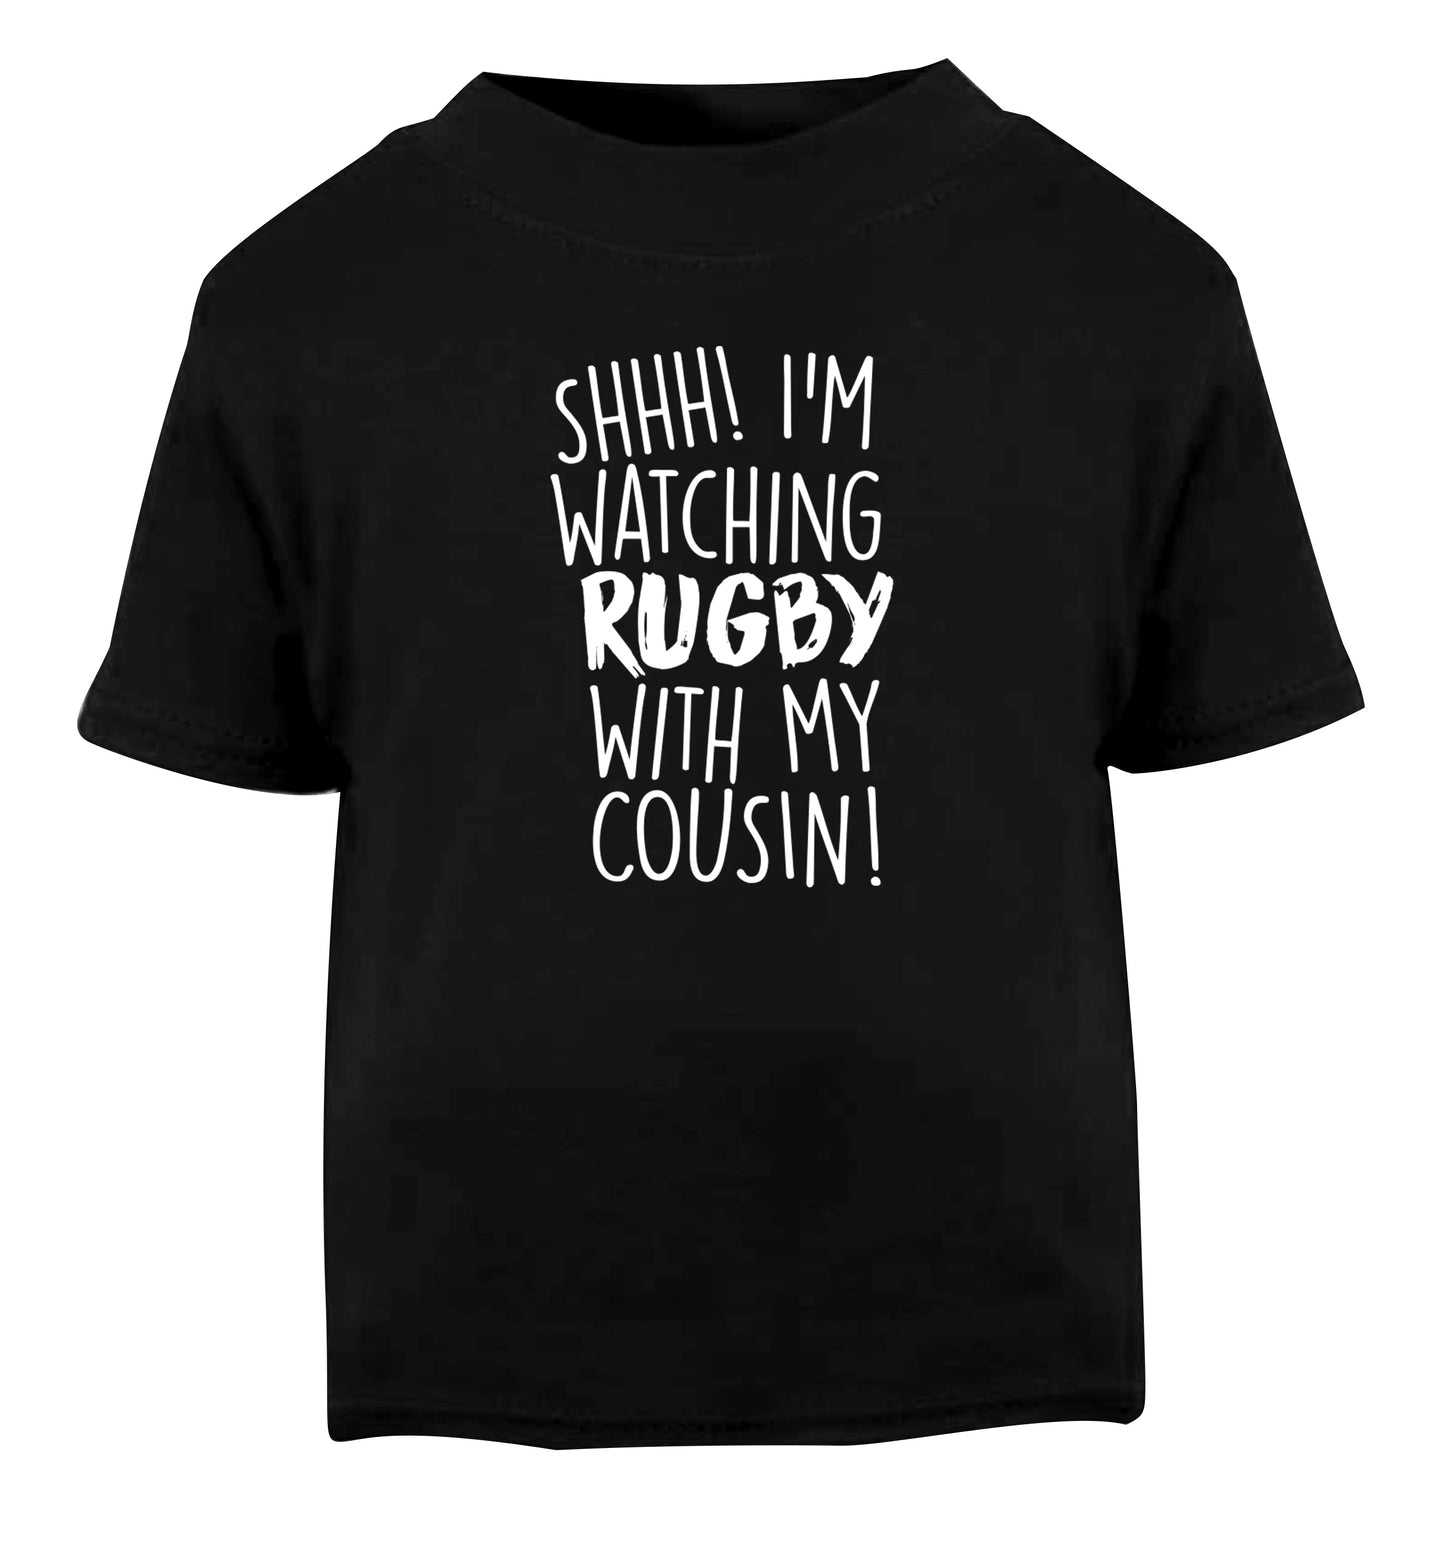 Shhh I'm watching rugby with my cousin Black Baby Toddler Tshirt 2 years